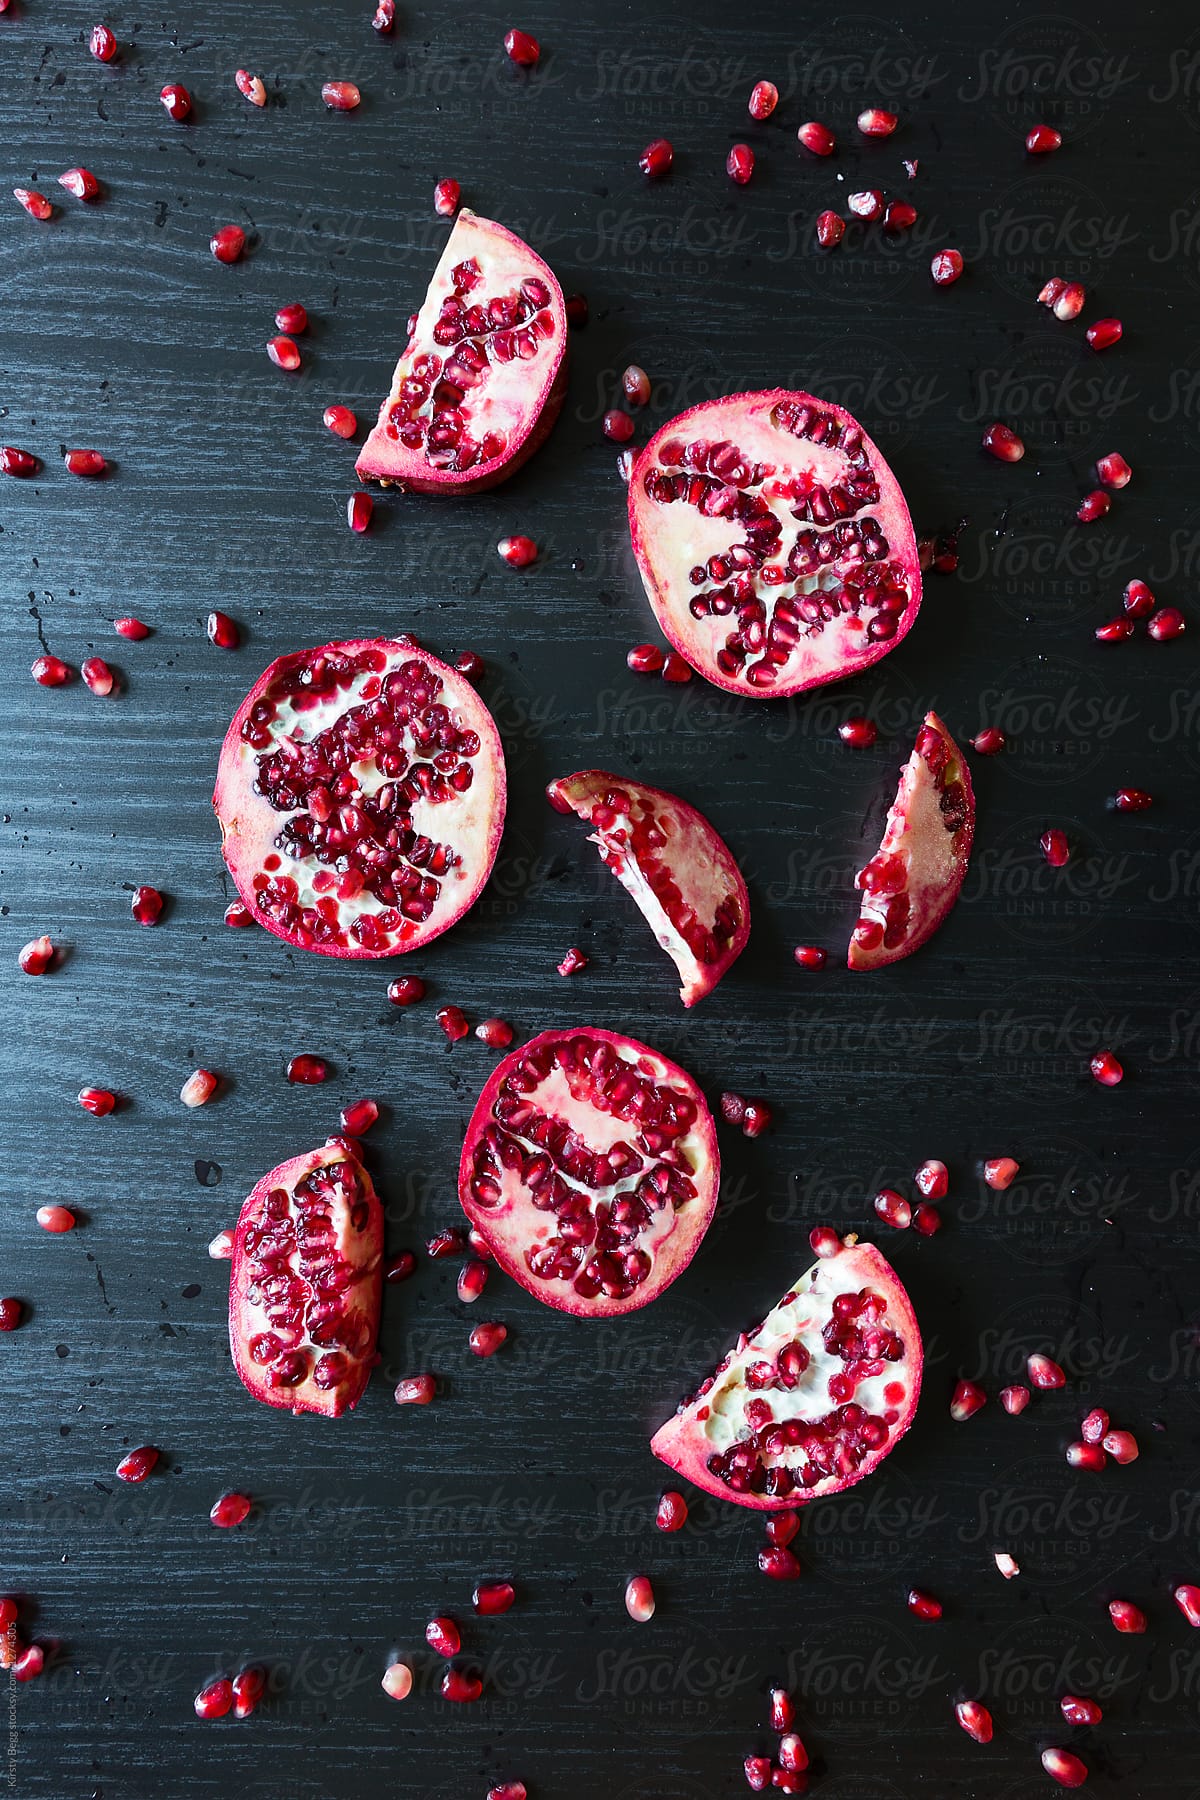 Graphic image of slices pomegranate and seeds on dark background